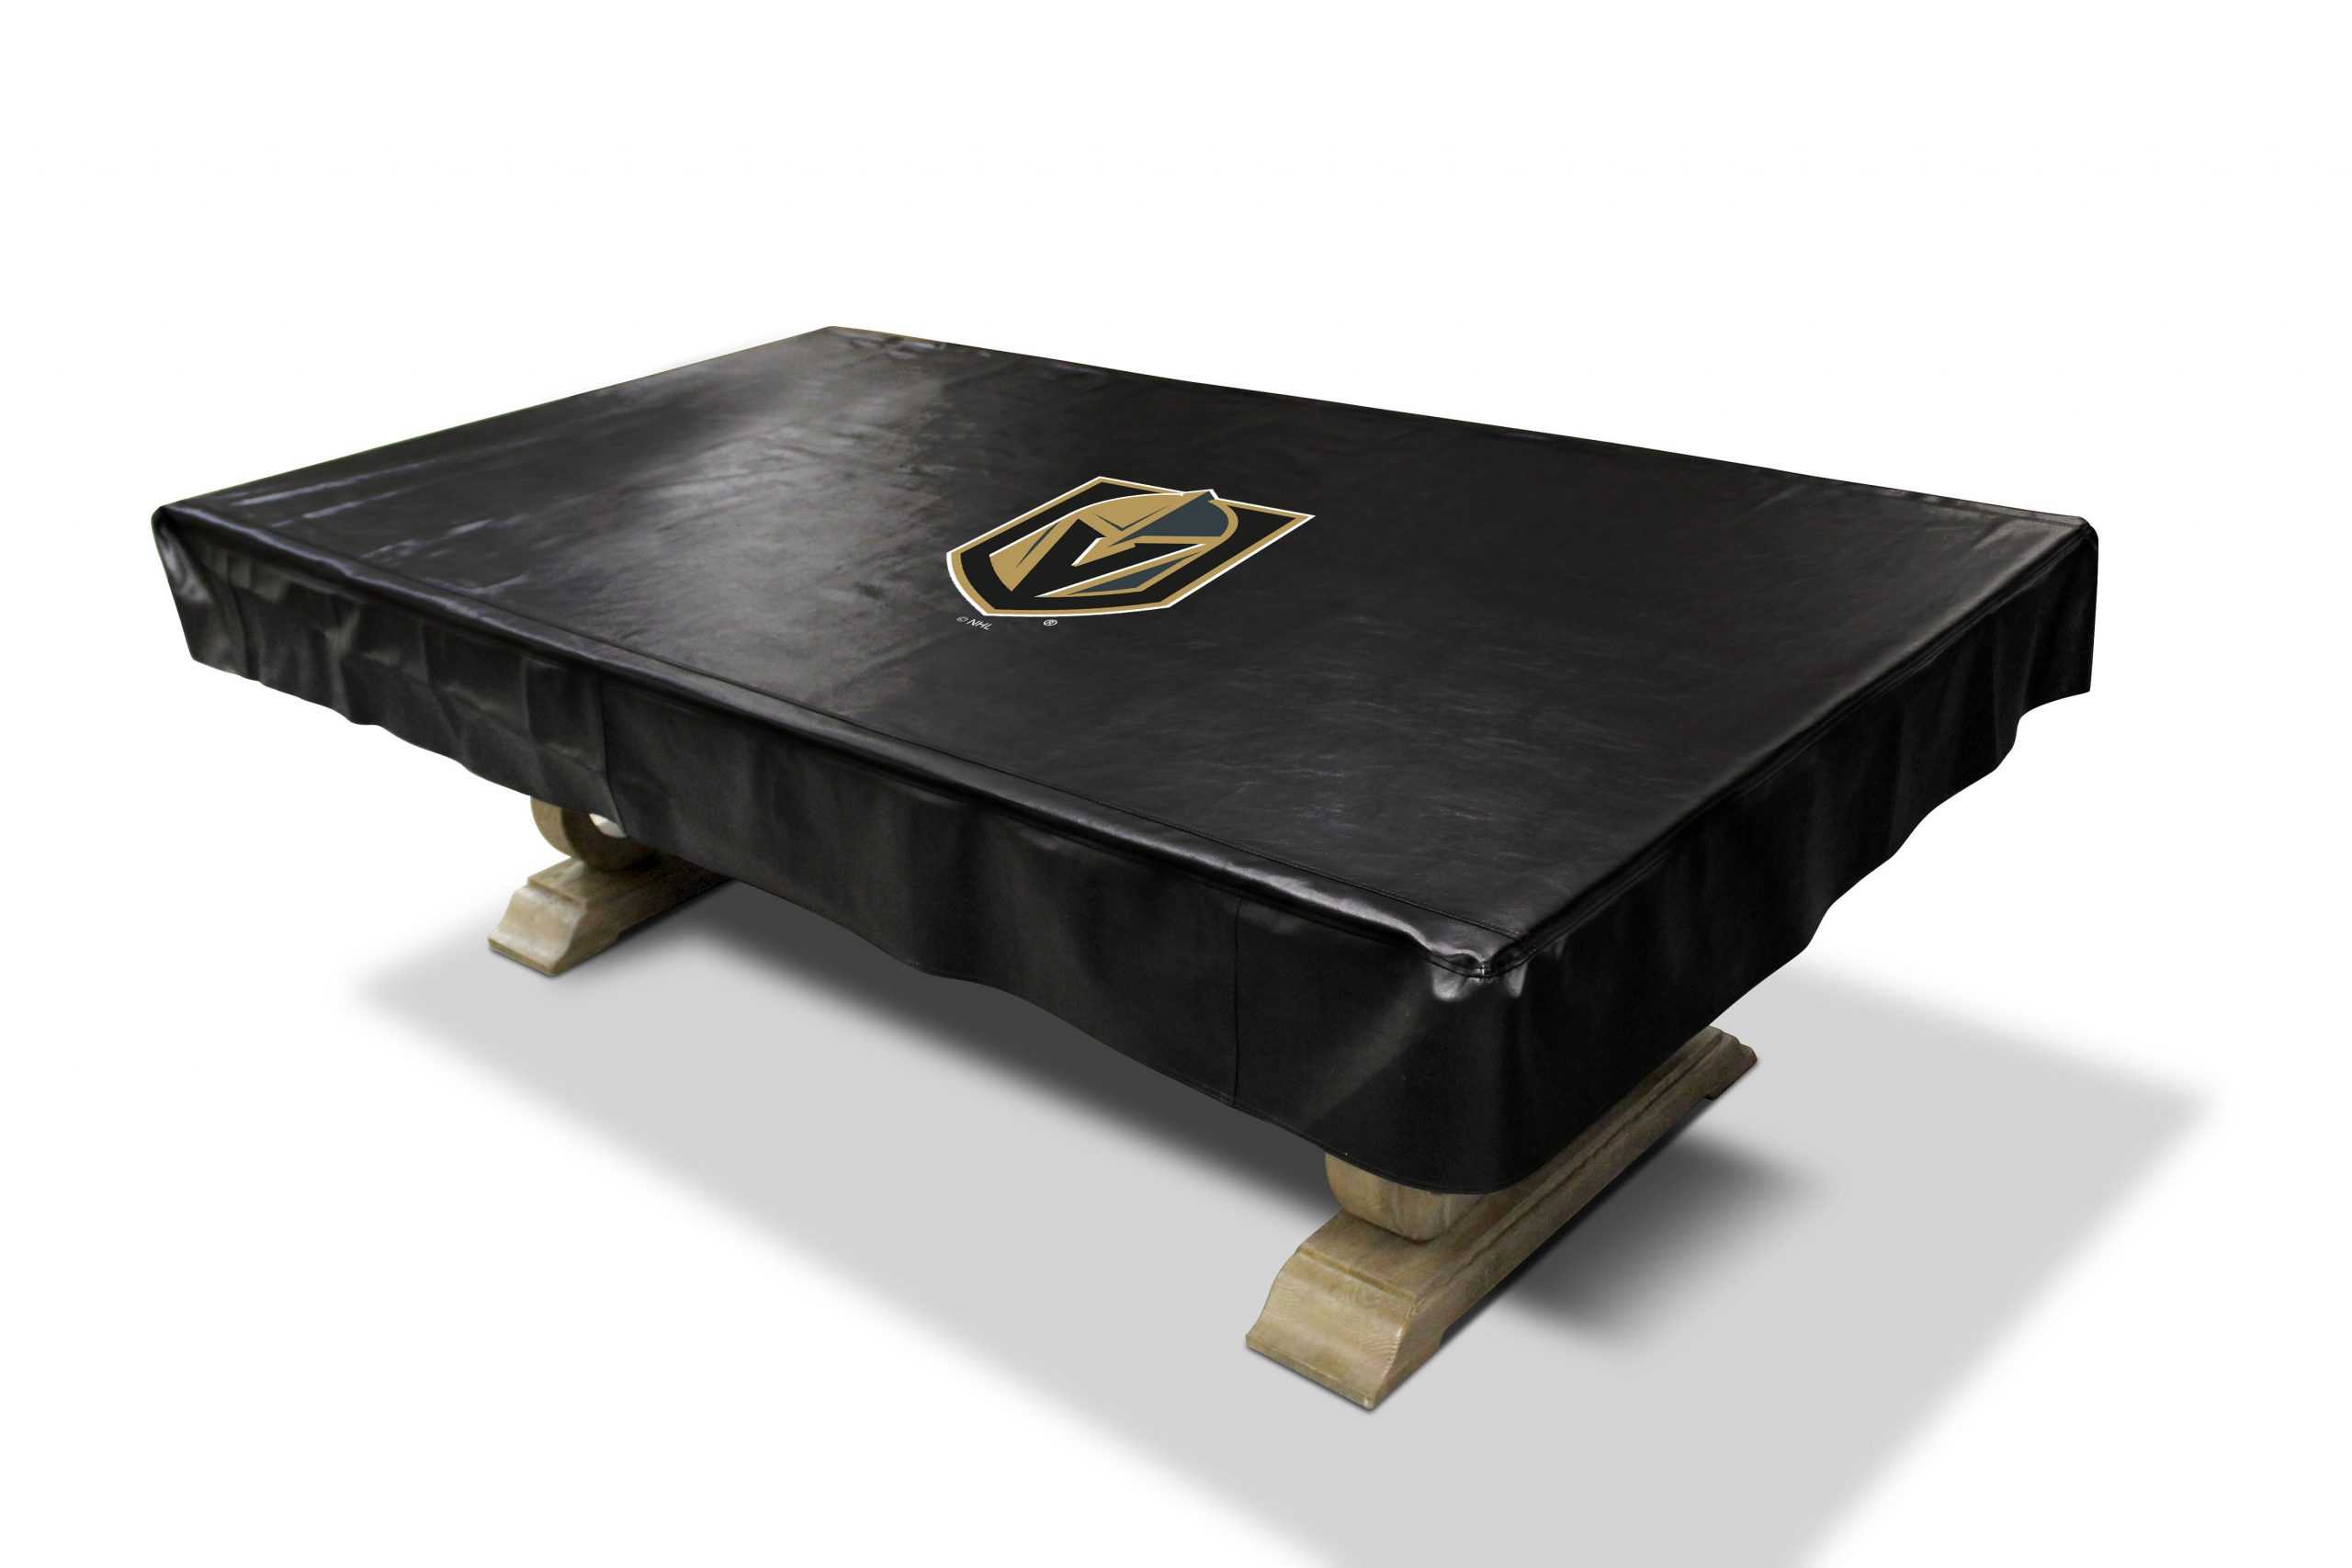 GOLDEN KNIGHTS 8' DELUXE POOL TABLE COVER